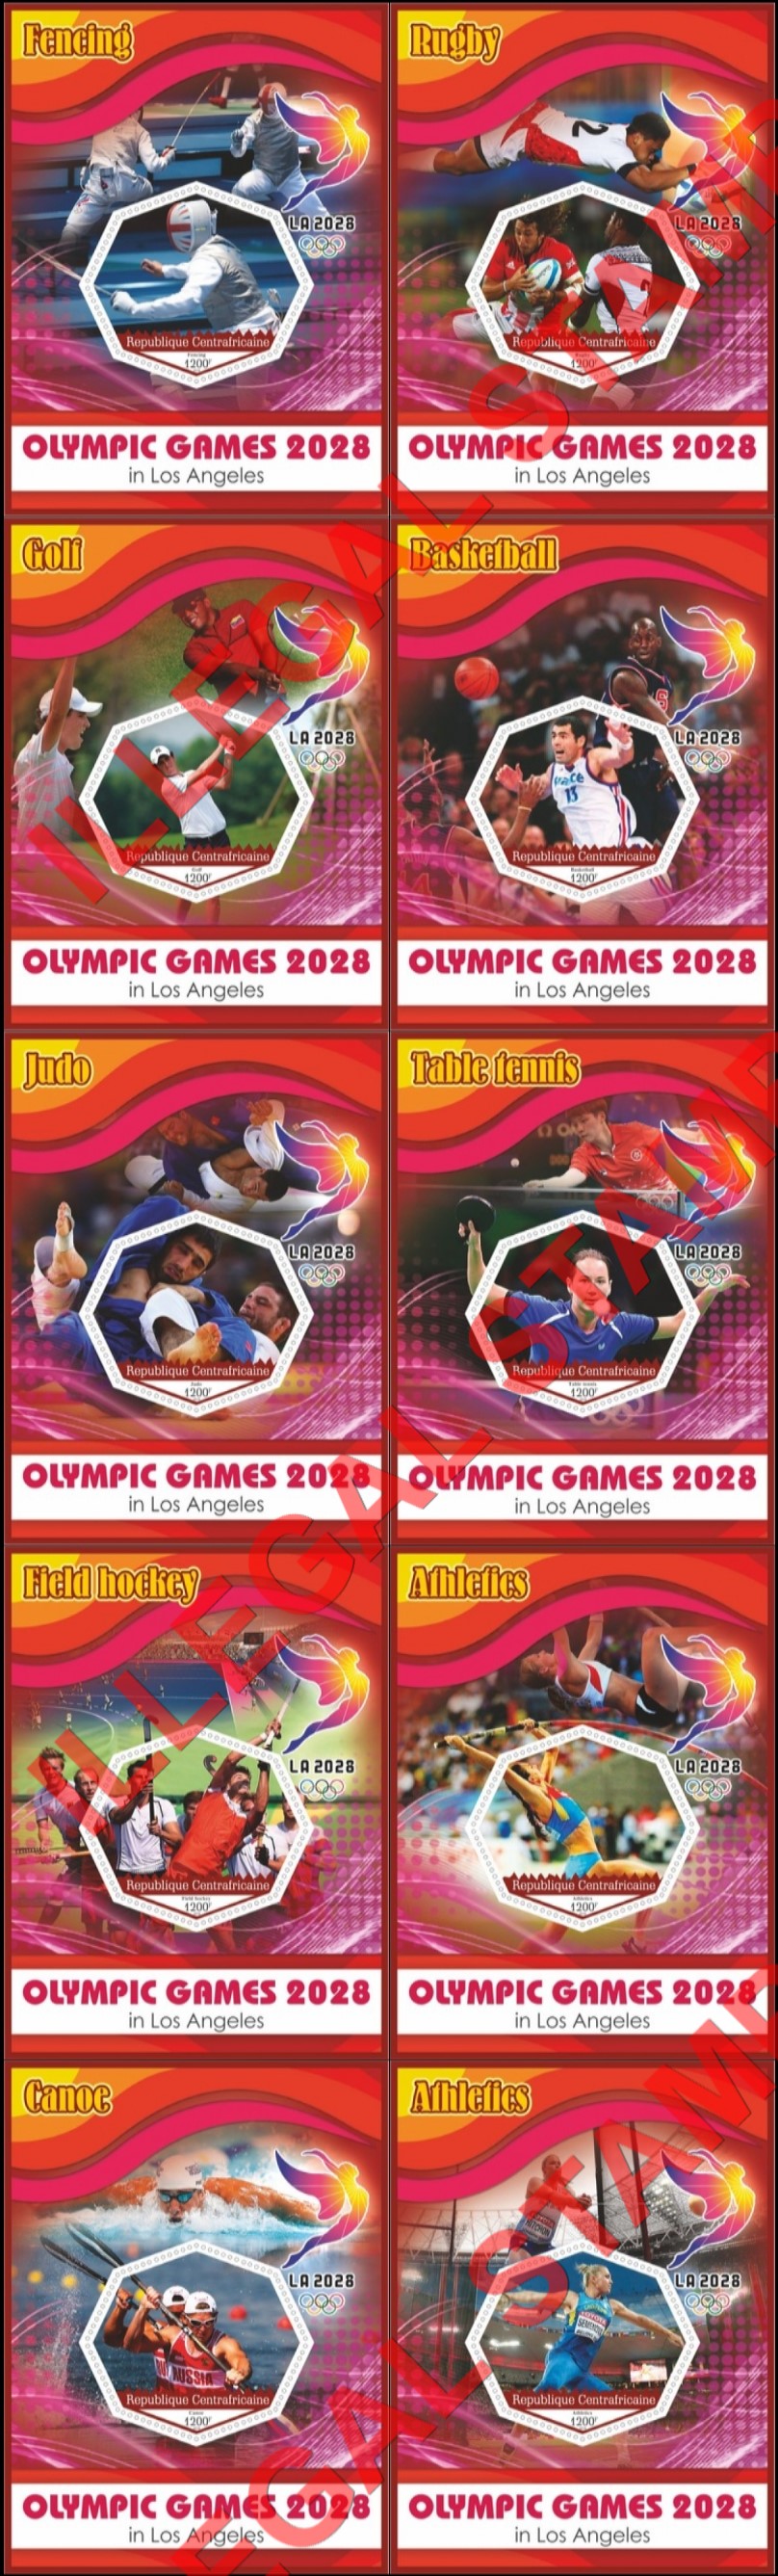 Central African Republic 2019 Olympic Games in Los Angeles in 2028 Illegal Stamp Souvenir Sheets of 1